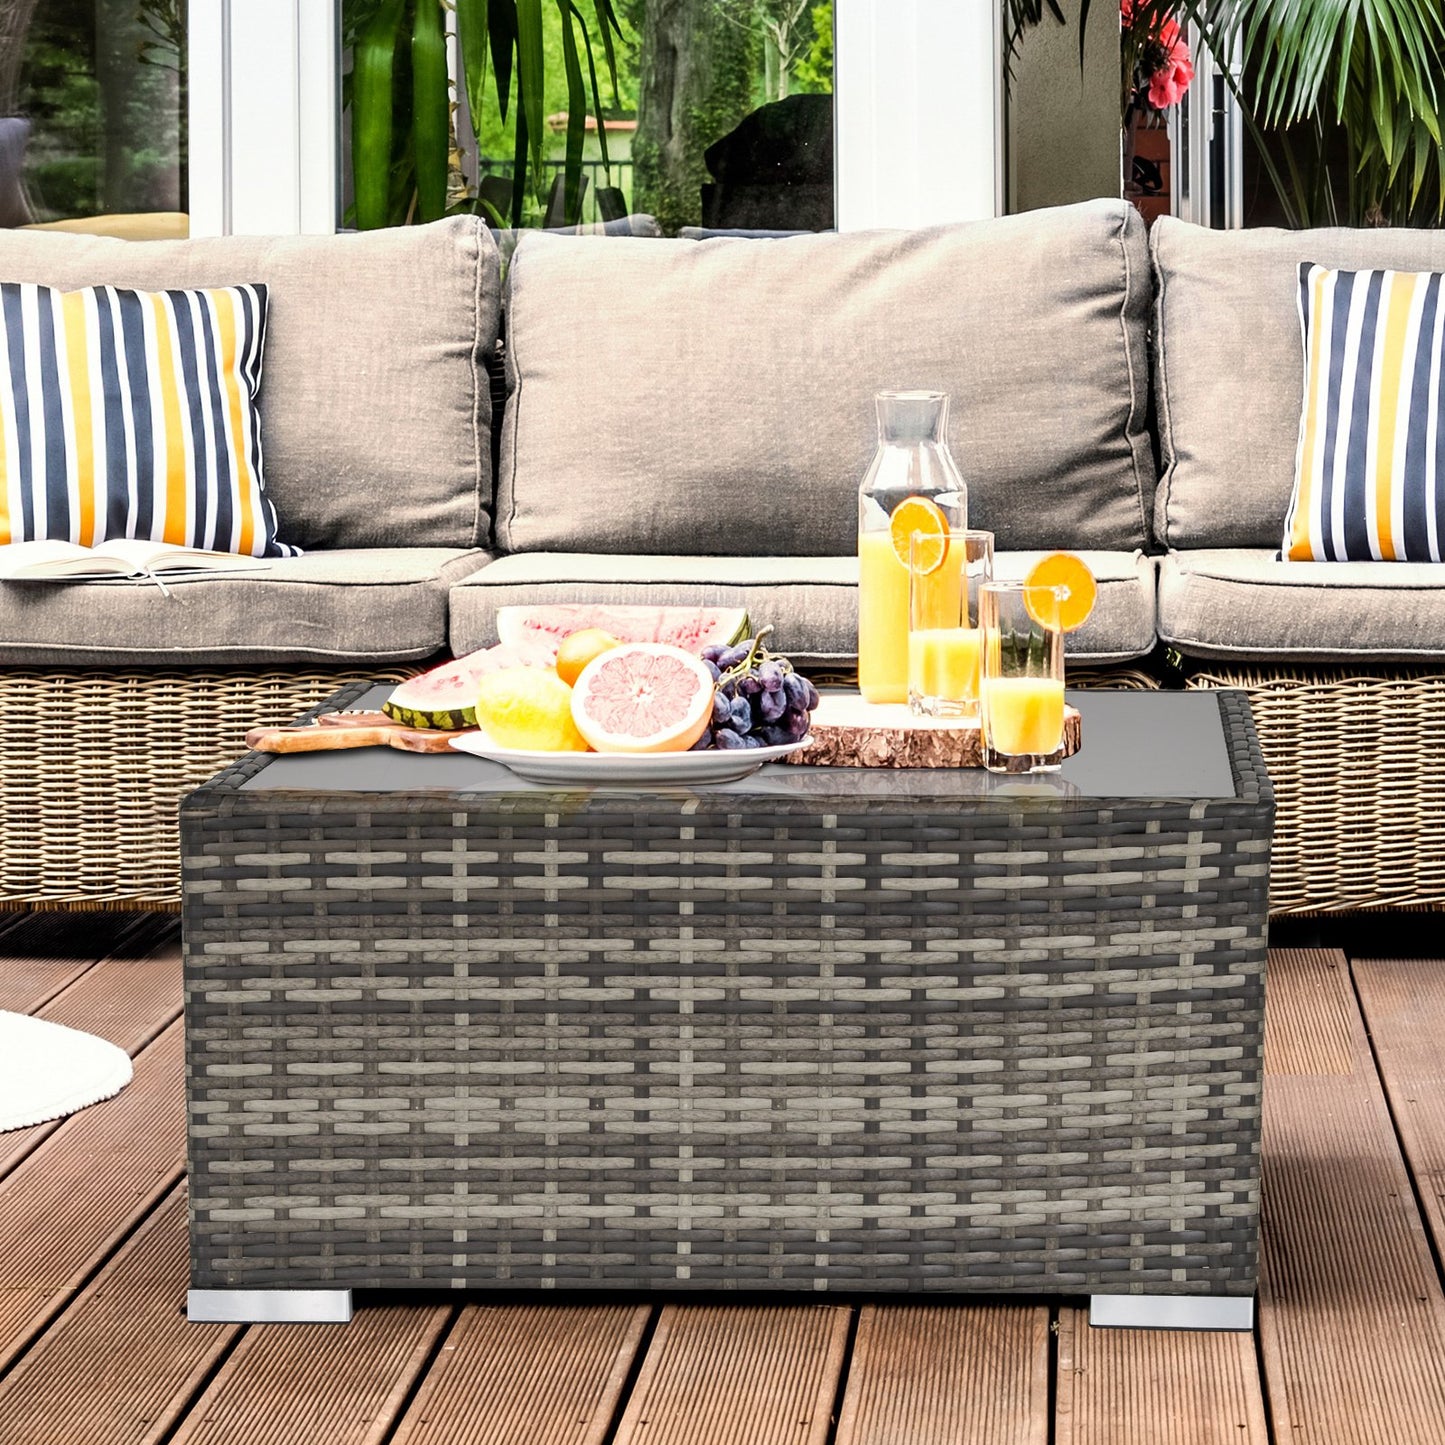 Outsunny Patio Wicker Coffee Table w/ Glass Top Furniture Suitable for Garden Backyard